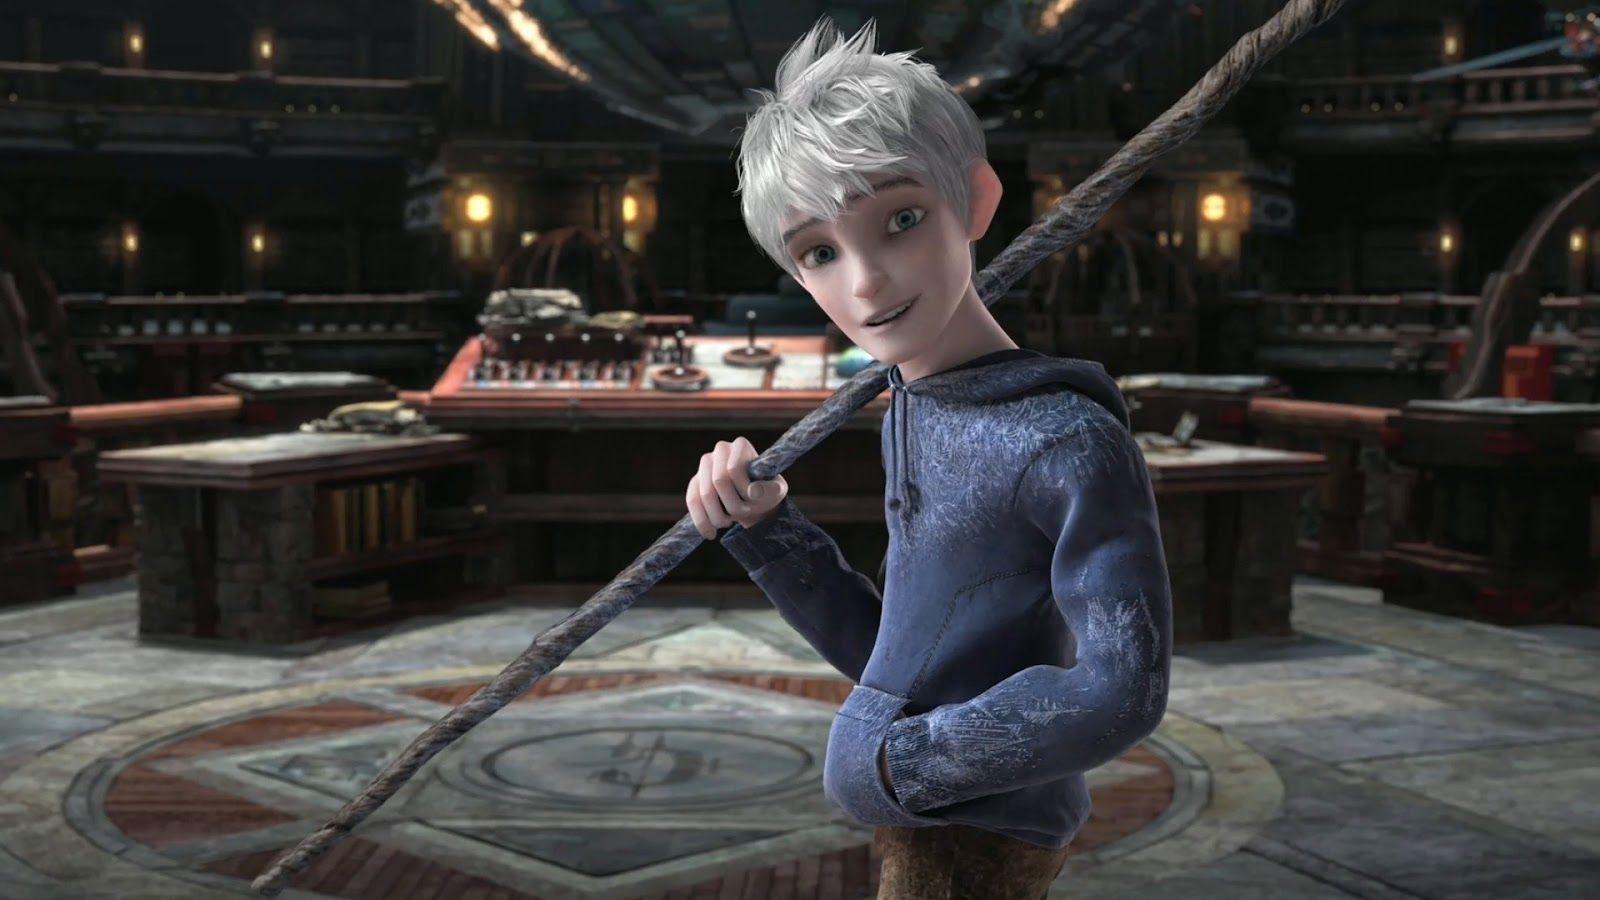 3D Rise of the Guardians Wallpaper in HD (2012)